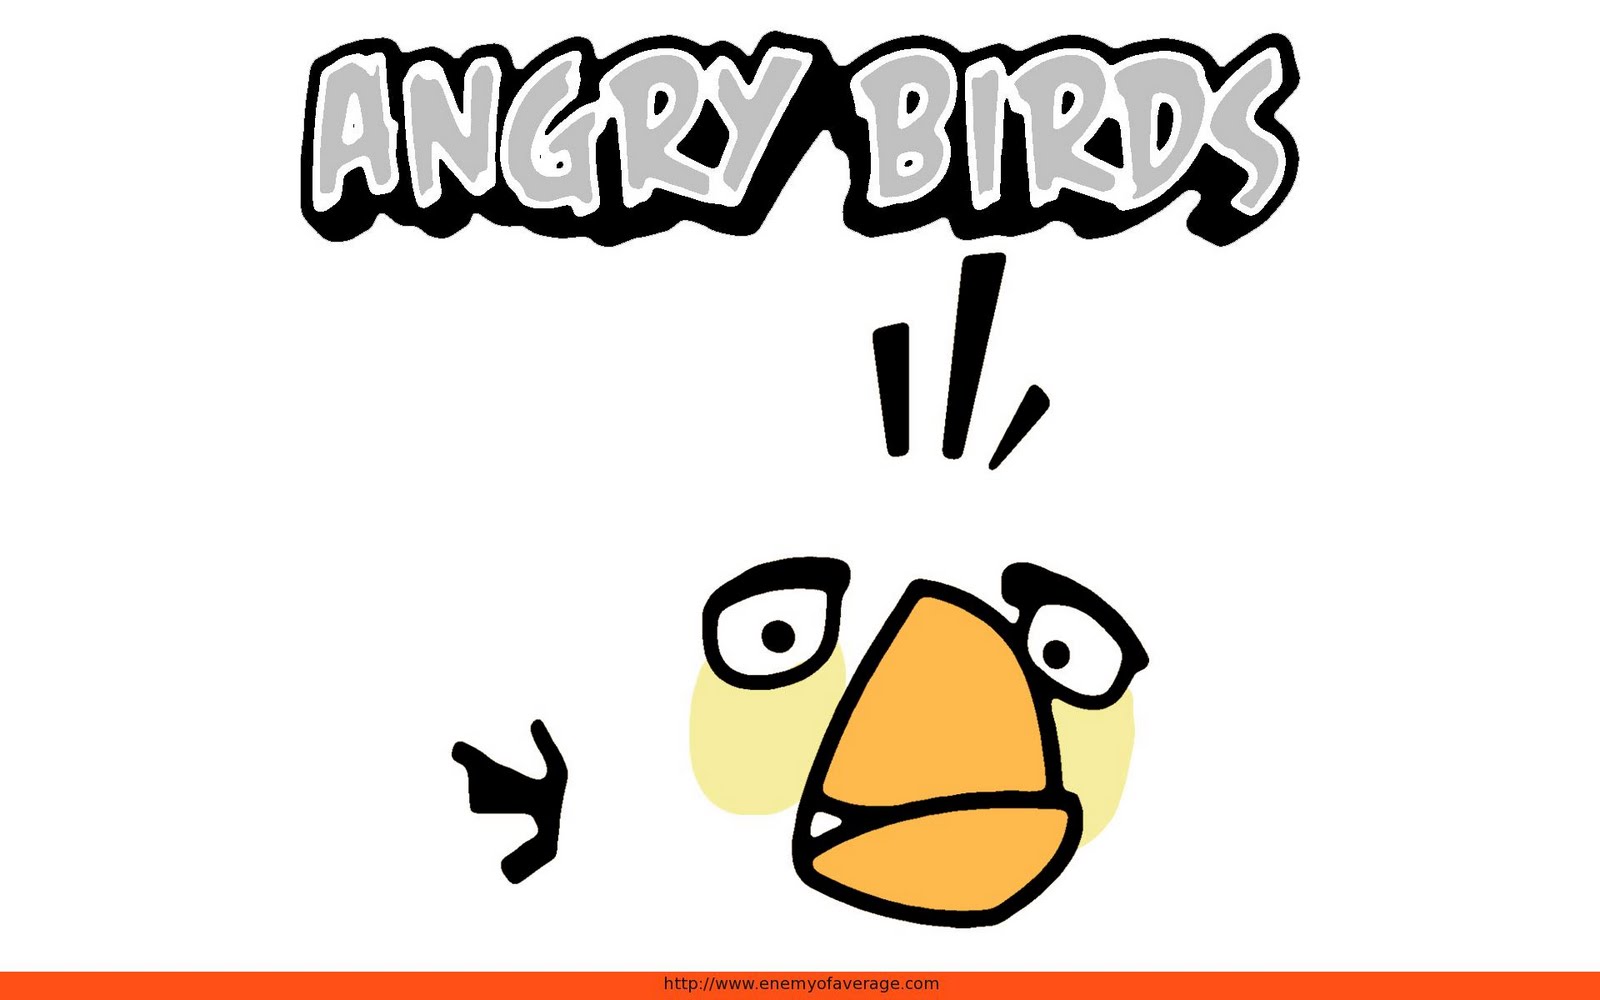 Wallpaper collection: Angry bird wallpaper